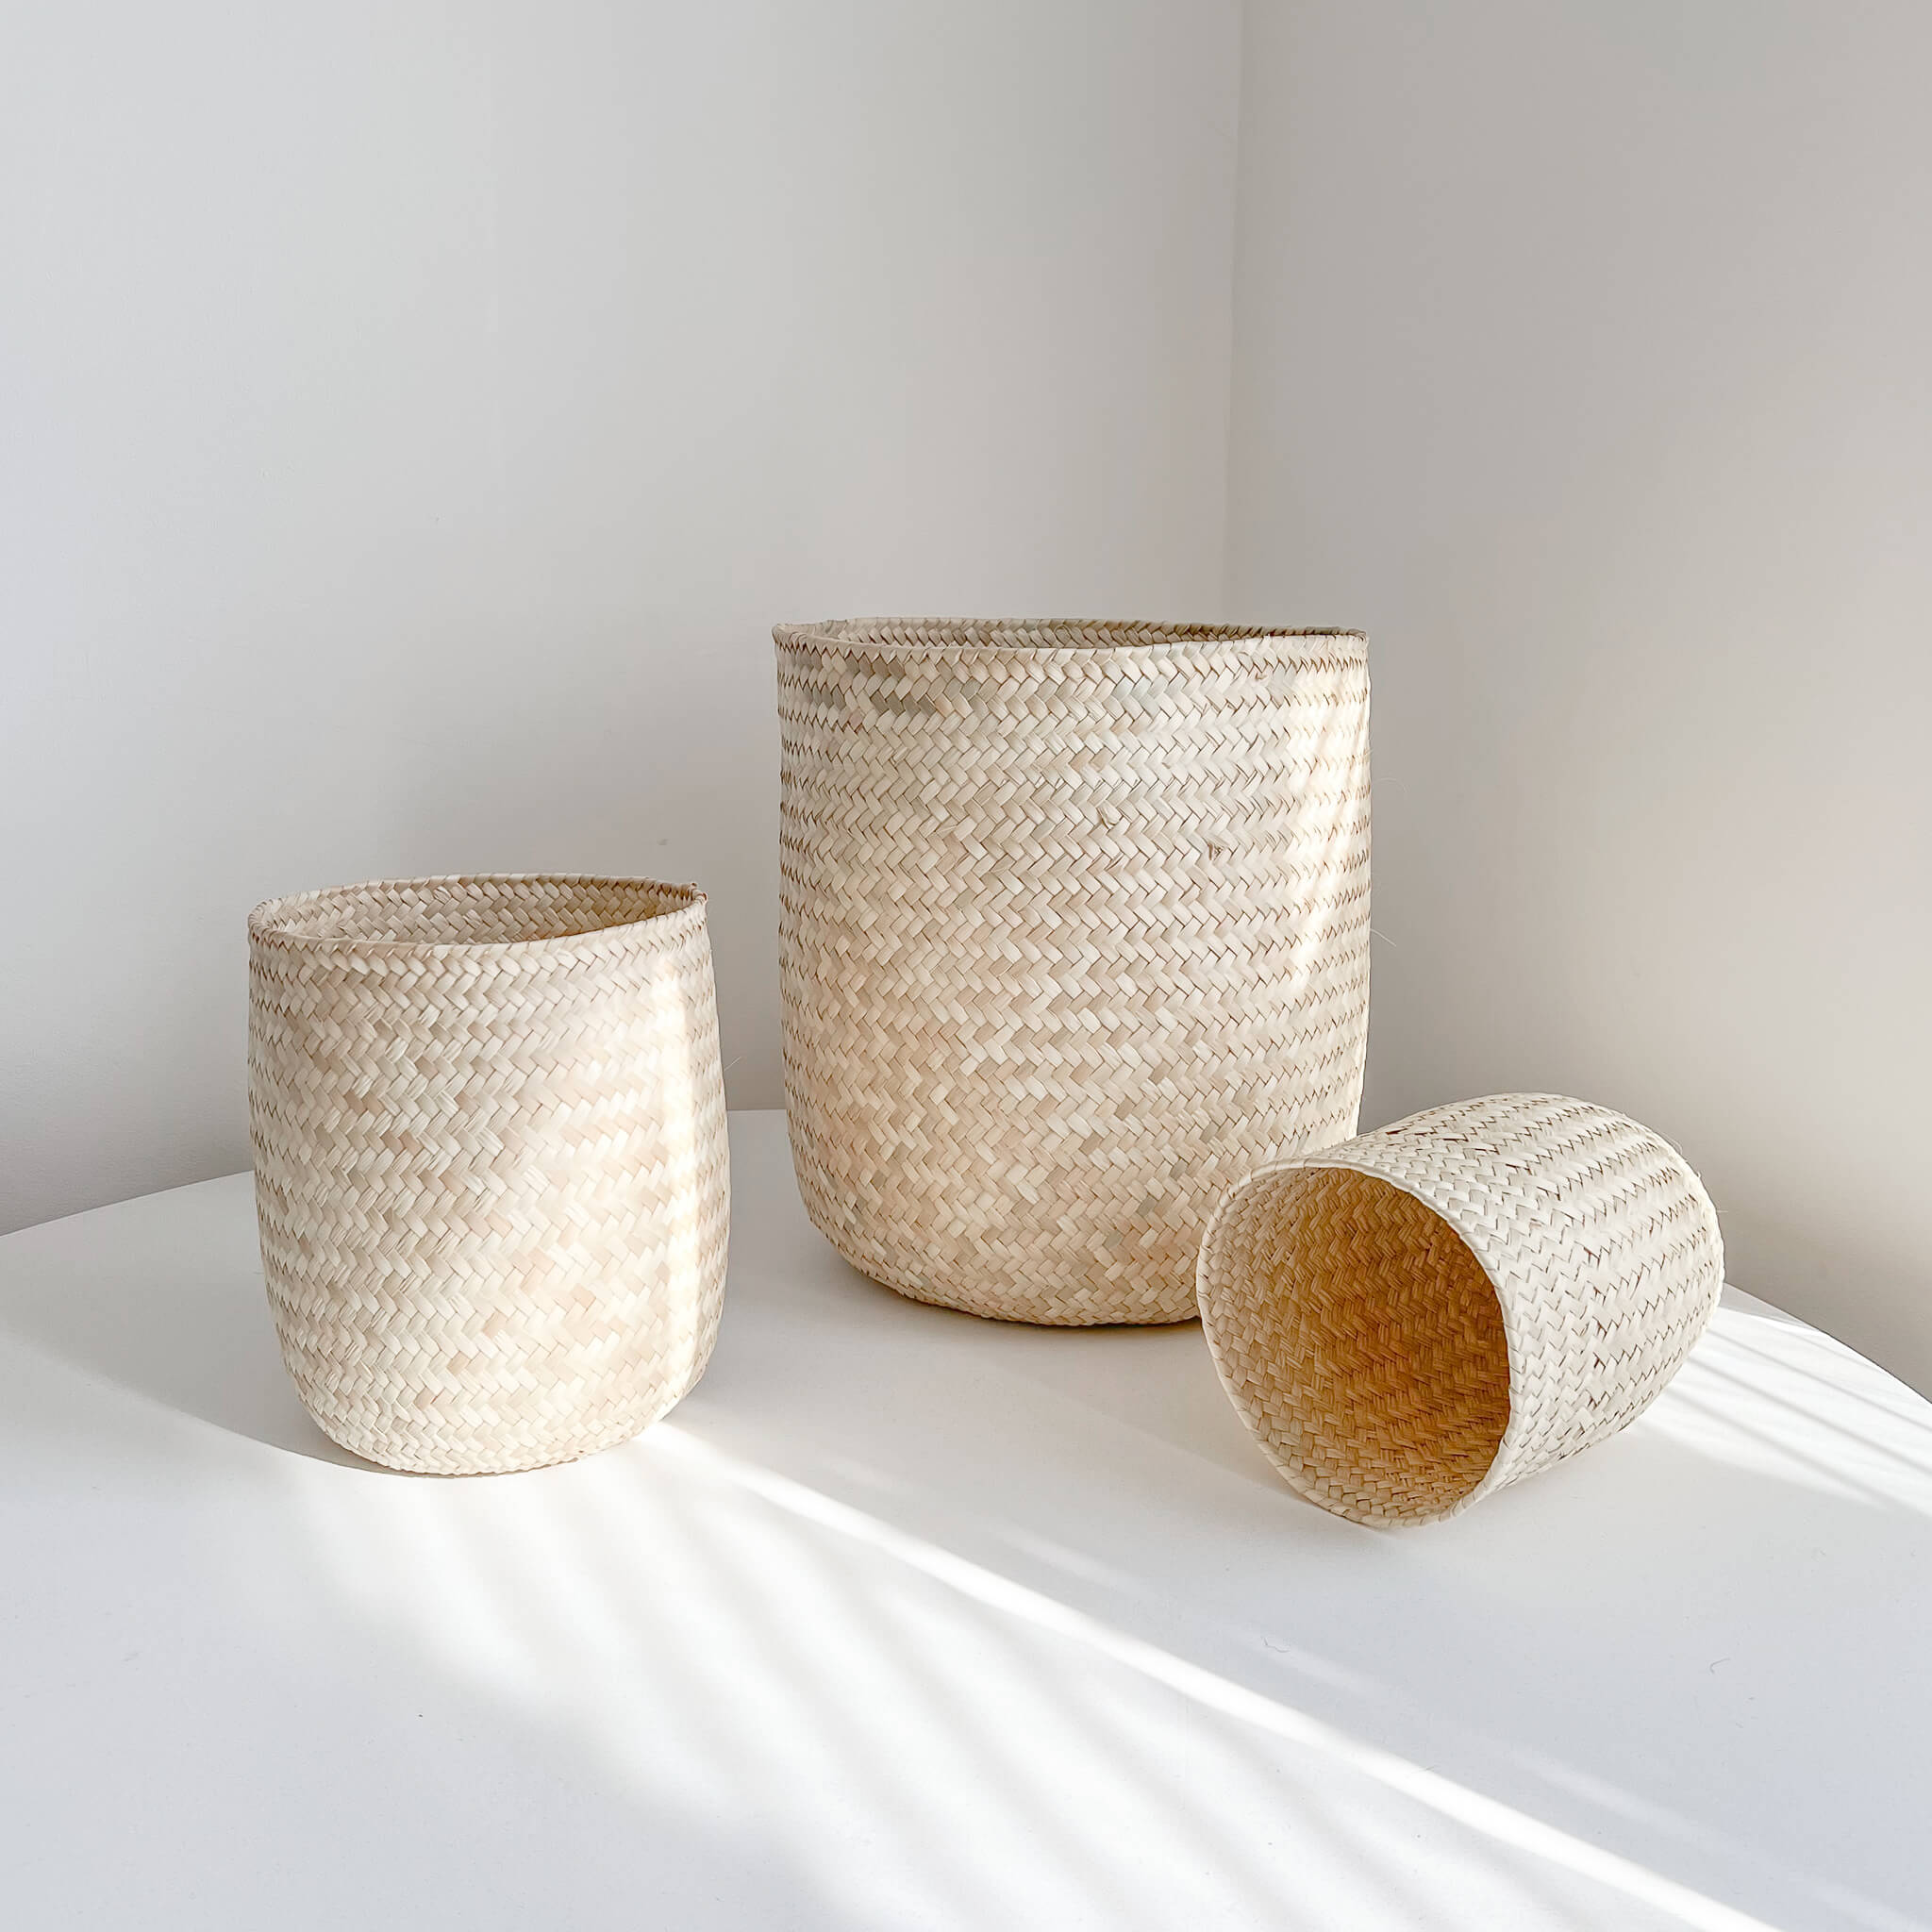 Oaxaca palm baskets in size small, medium and large on a white table.